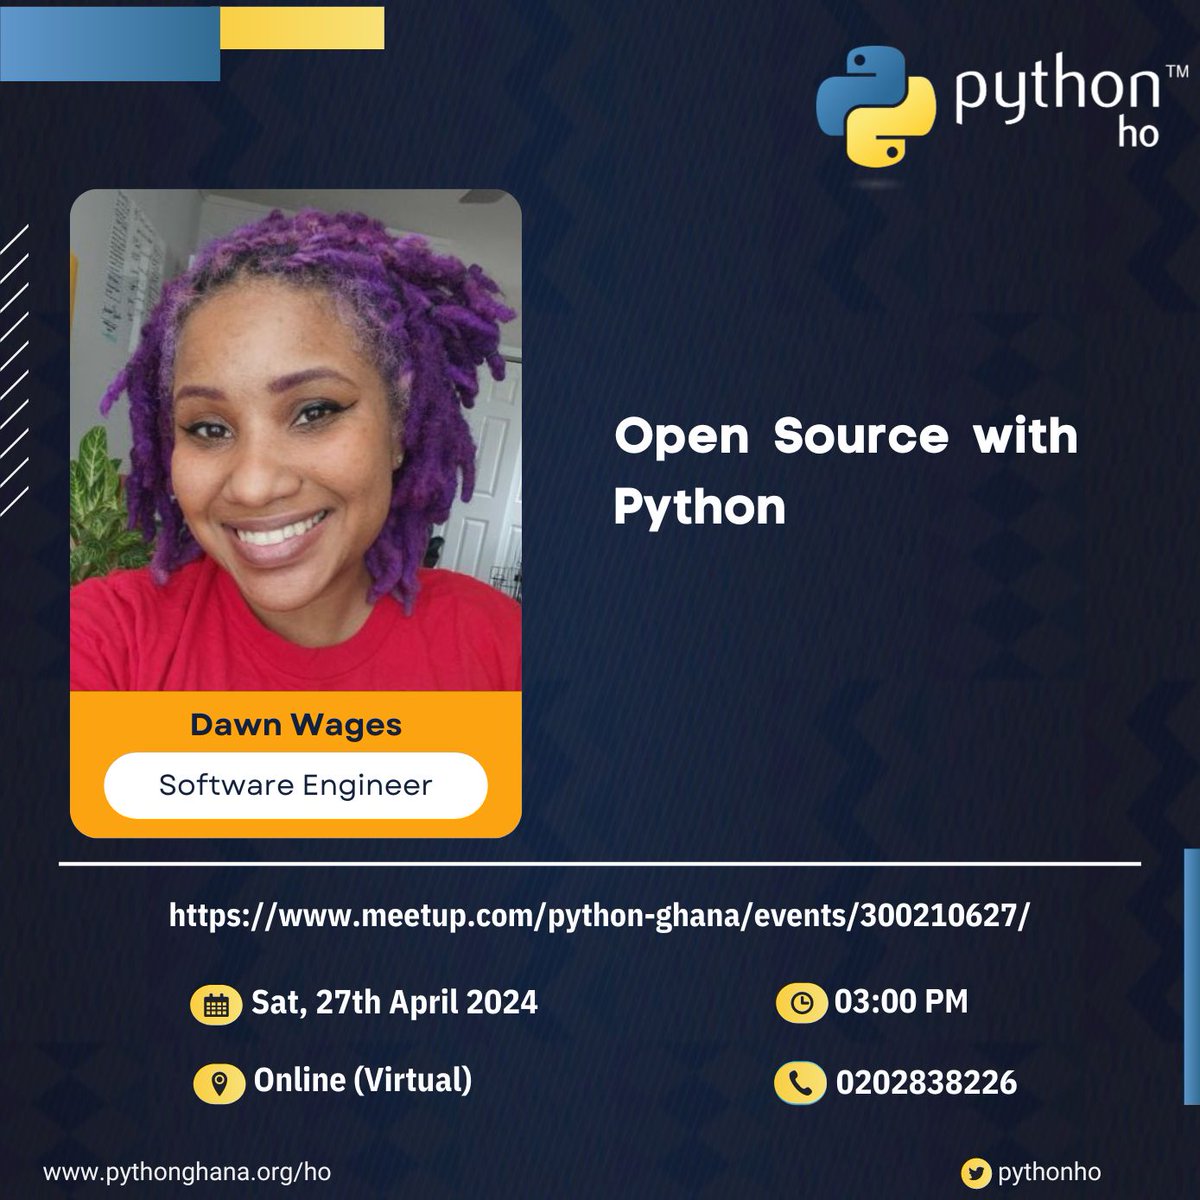 And we have @BajoranEngineer as a speaker too #opensourcewithpython #pyho #ho_volta_region